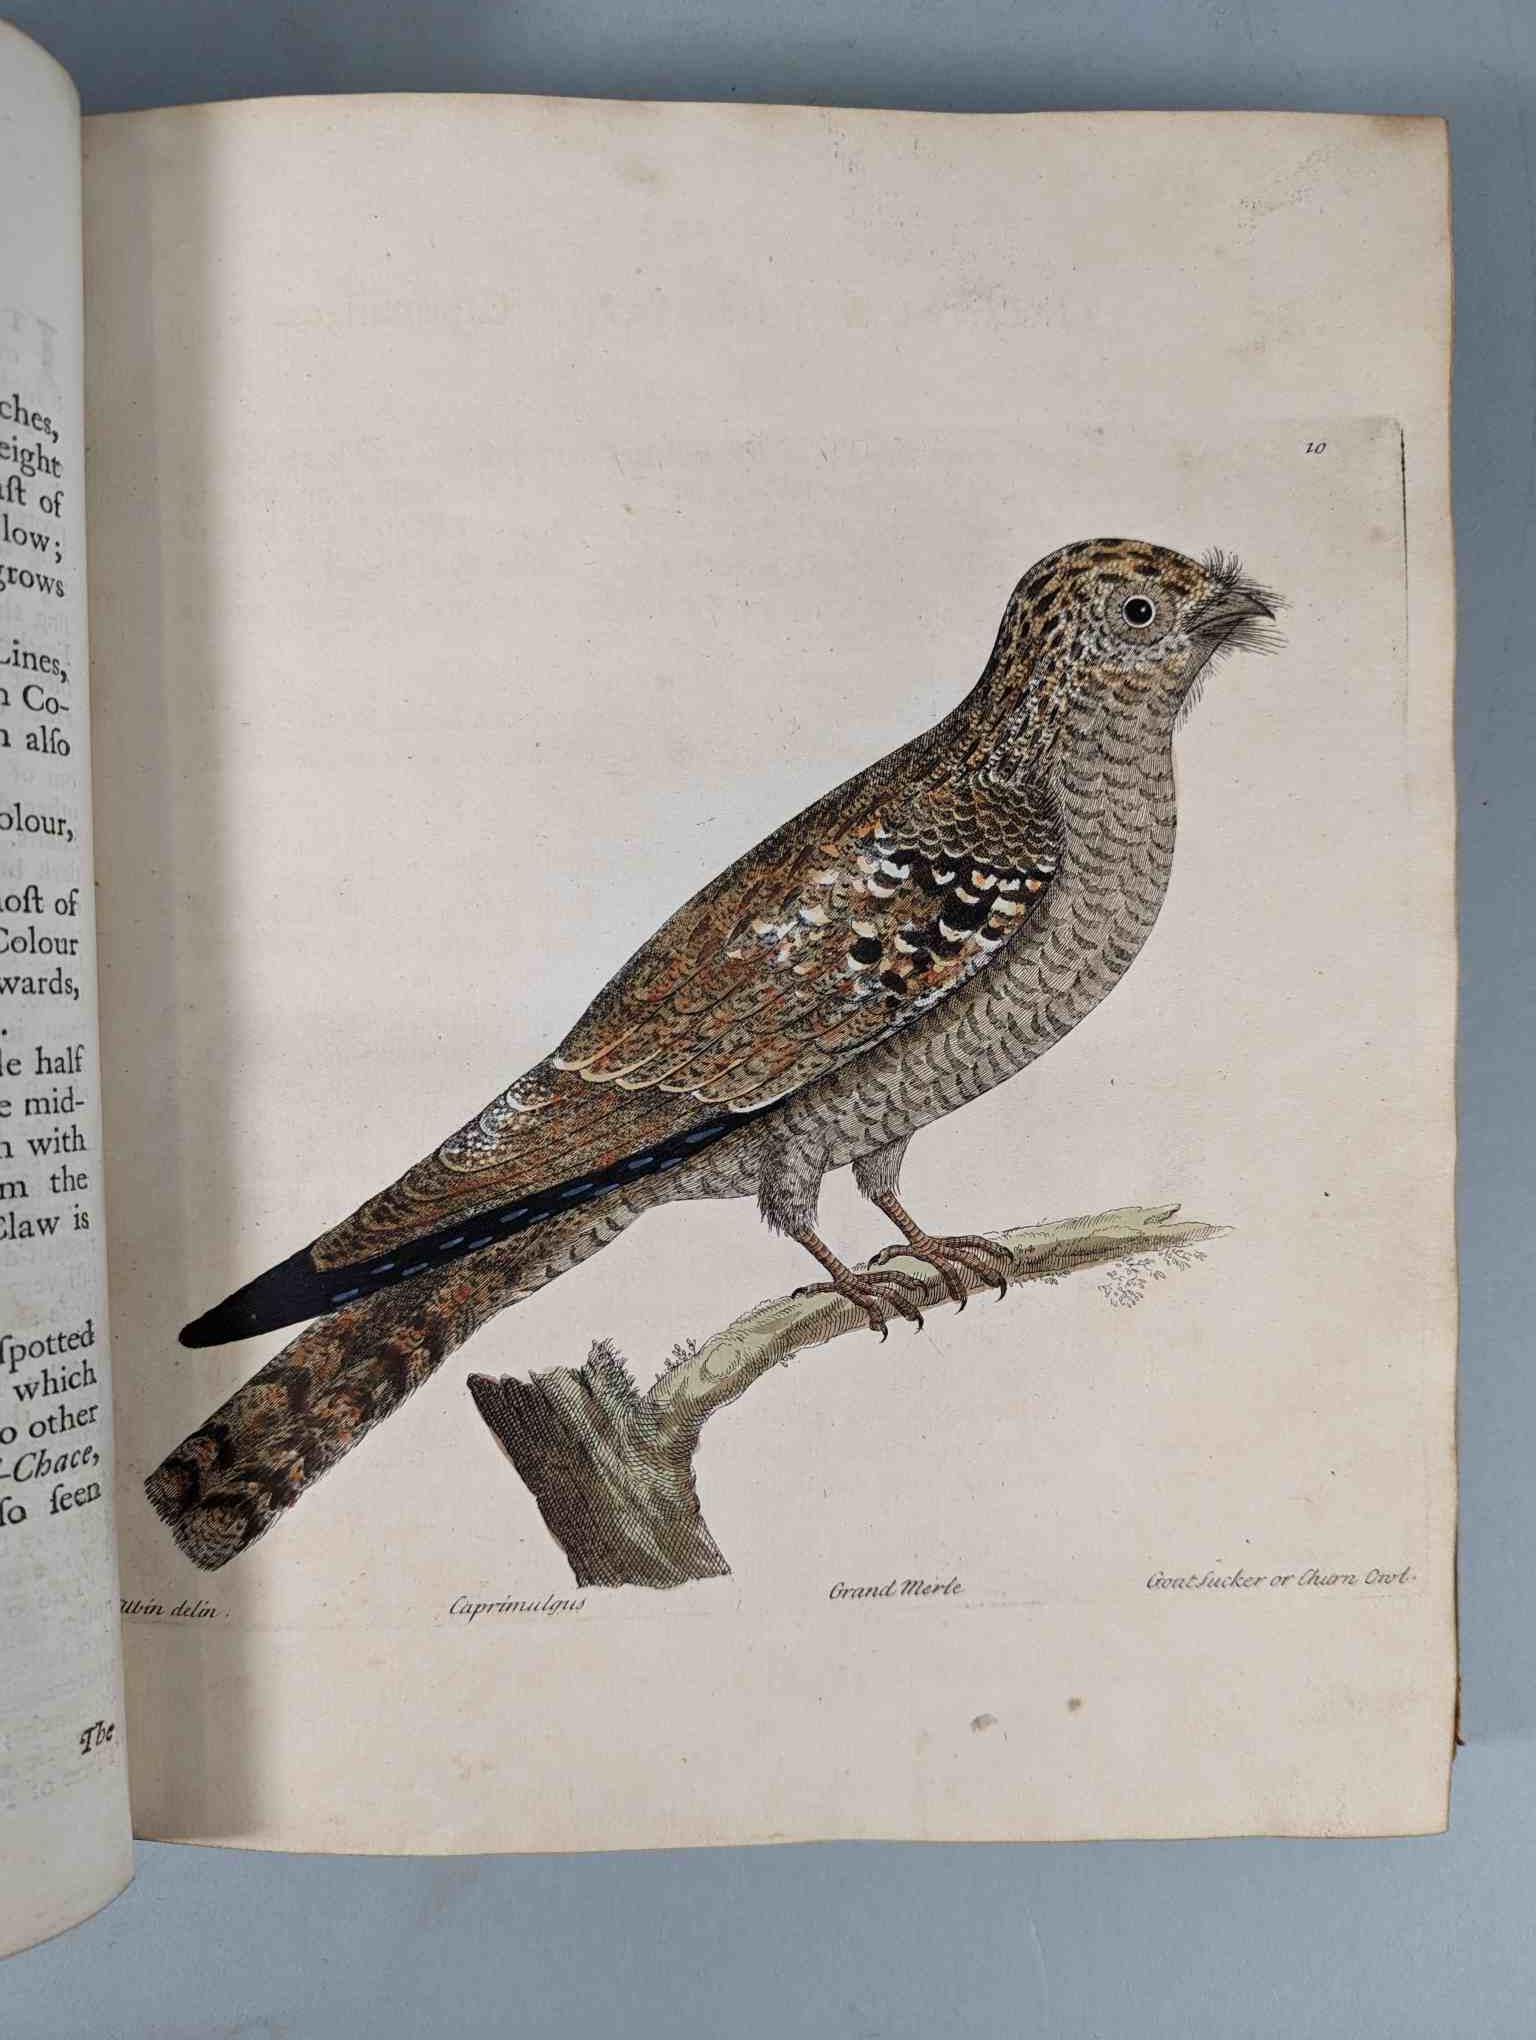 ALBIN, Eleazar. A Natural History of Birds, to which are added, Notes and Observations by W. - Image 13 of 208